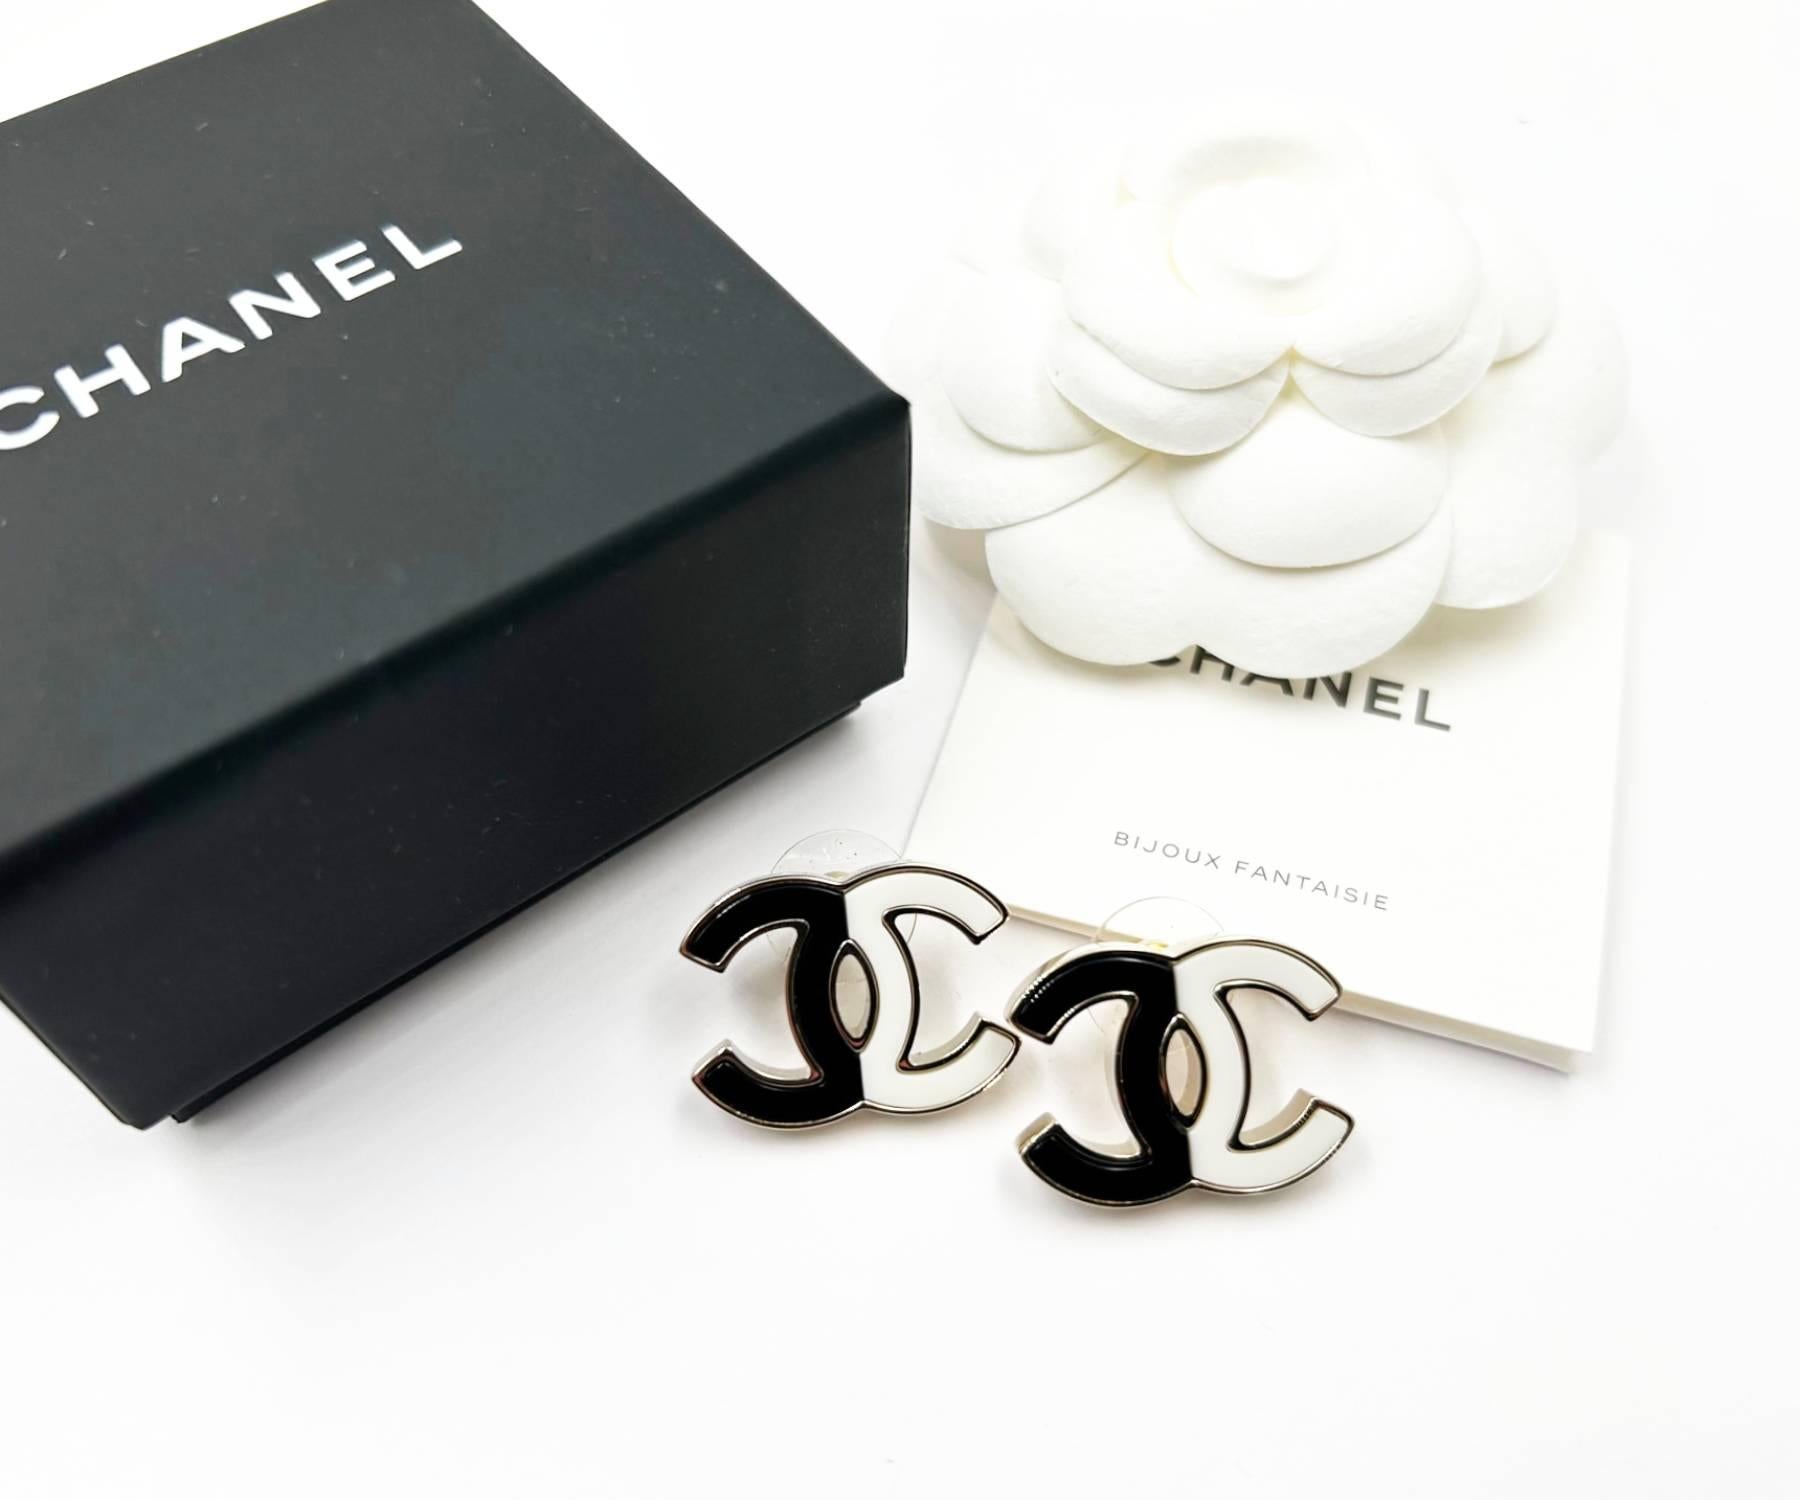 Chanel Classic Gold CC Black White Half Half Large Stud Piercing Earrings

*Marked 23
*Made in Italy
*Comes with the original box, pouch and booklet, in the original set

-It is approximately 1